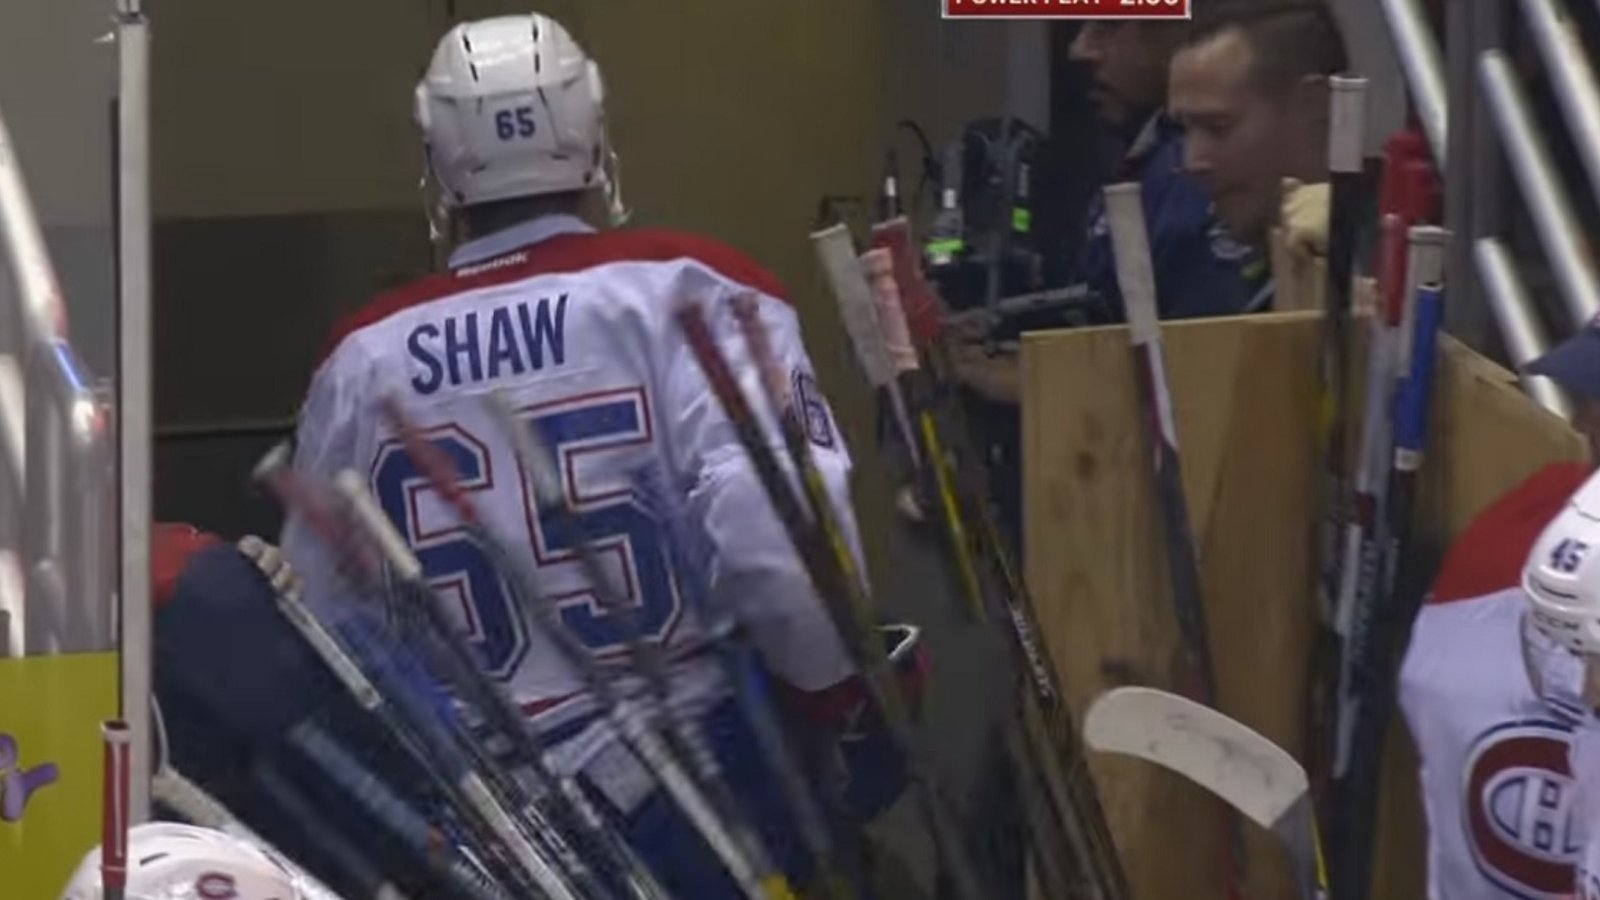 Andrew Shaw snaps in the penalty box, goes nuts, gets himself ejected from the game.